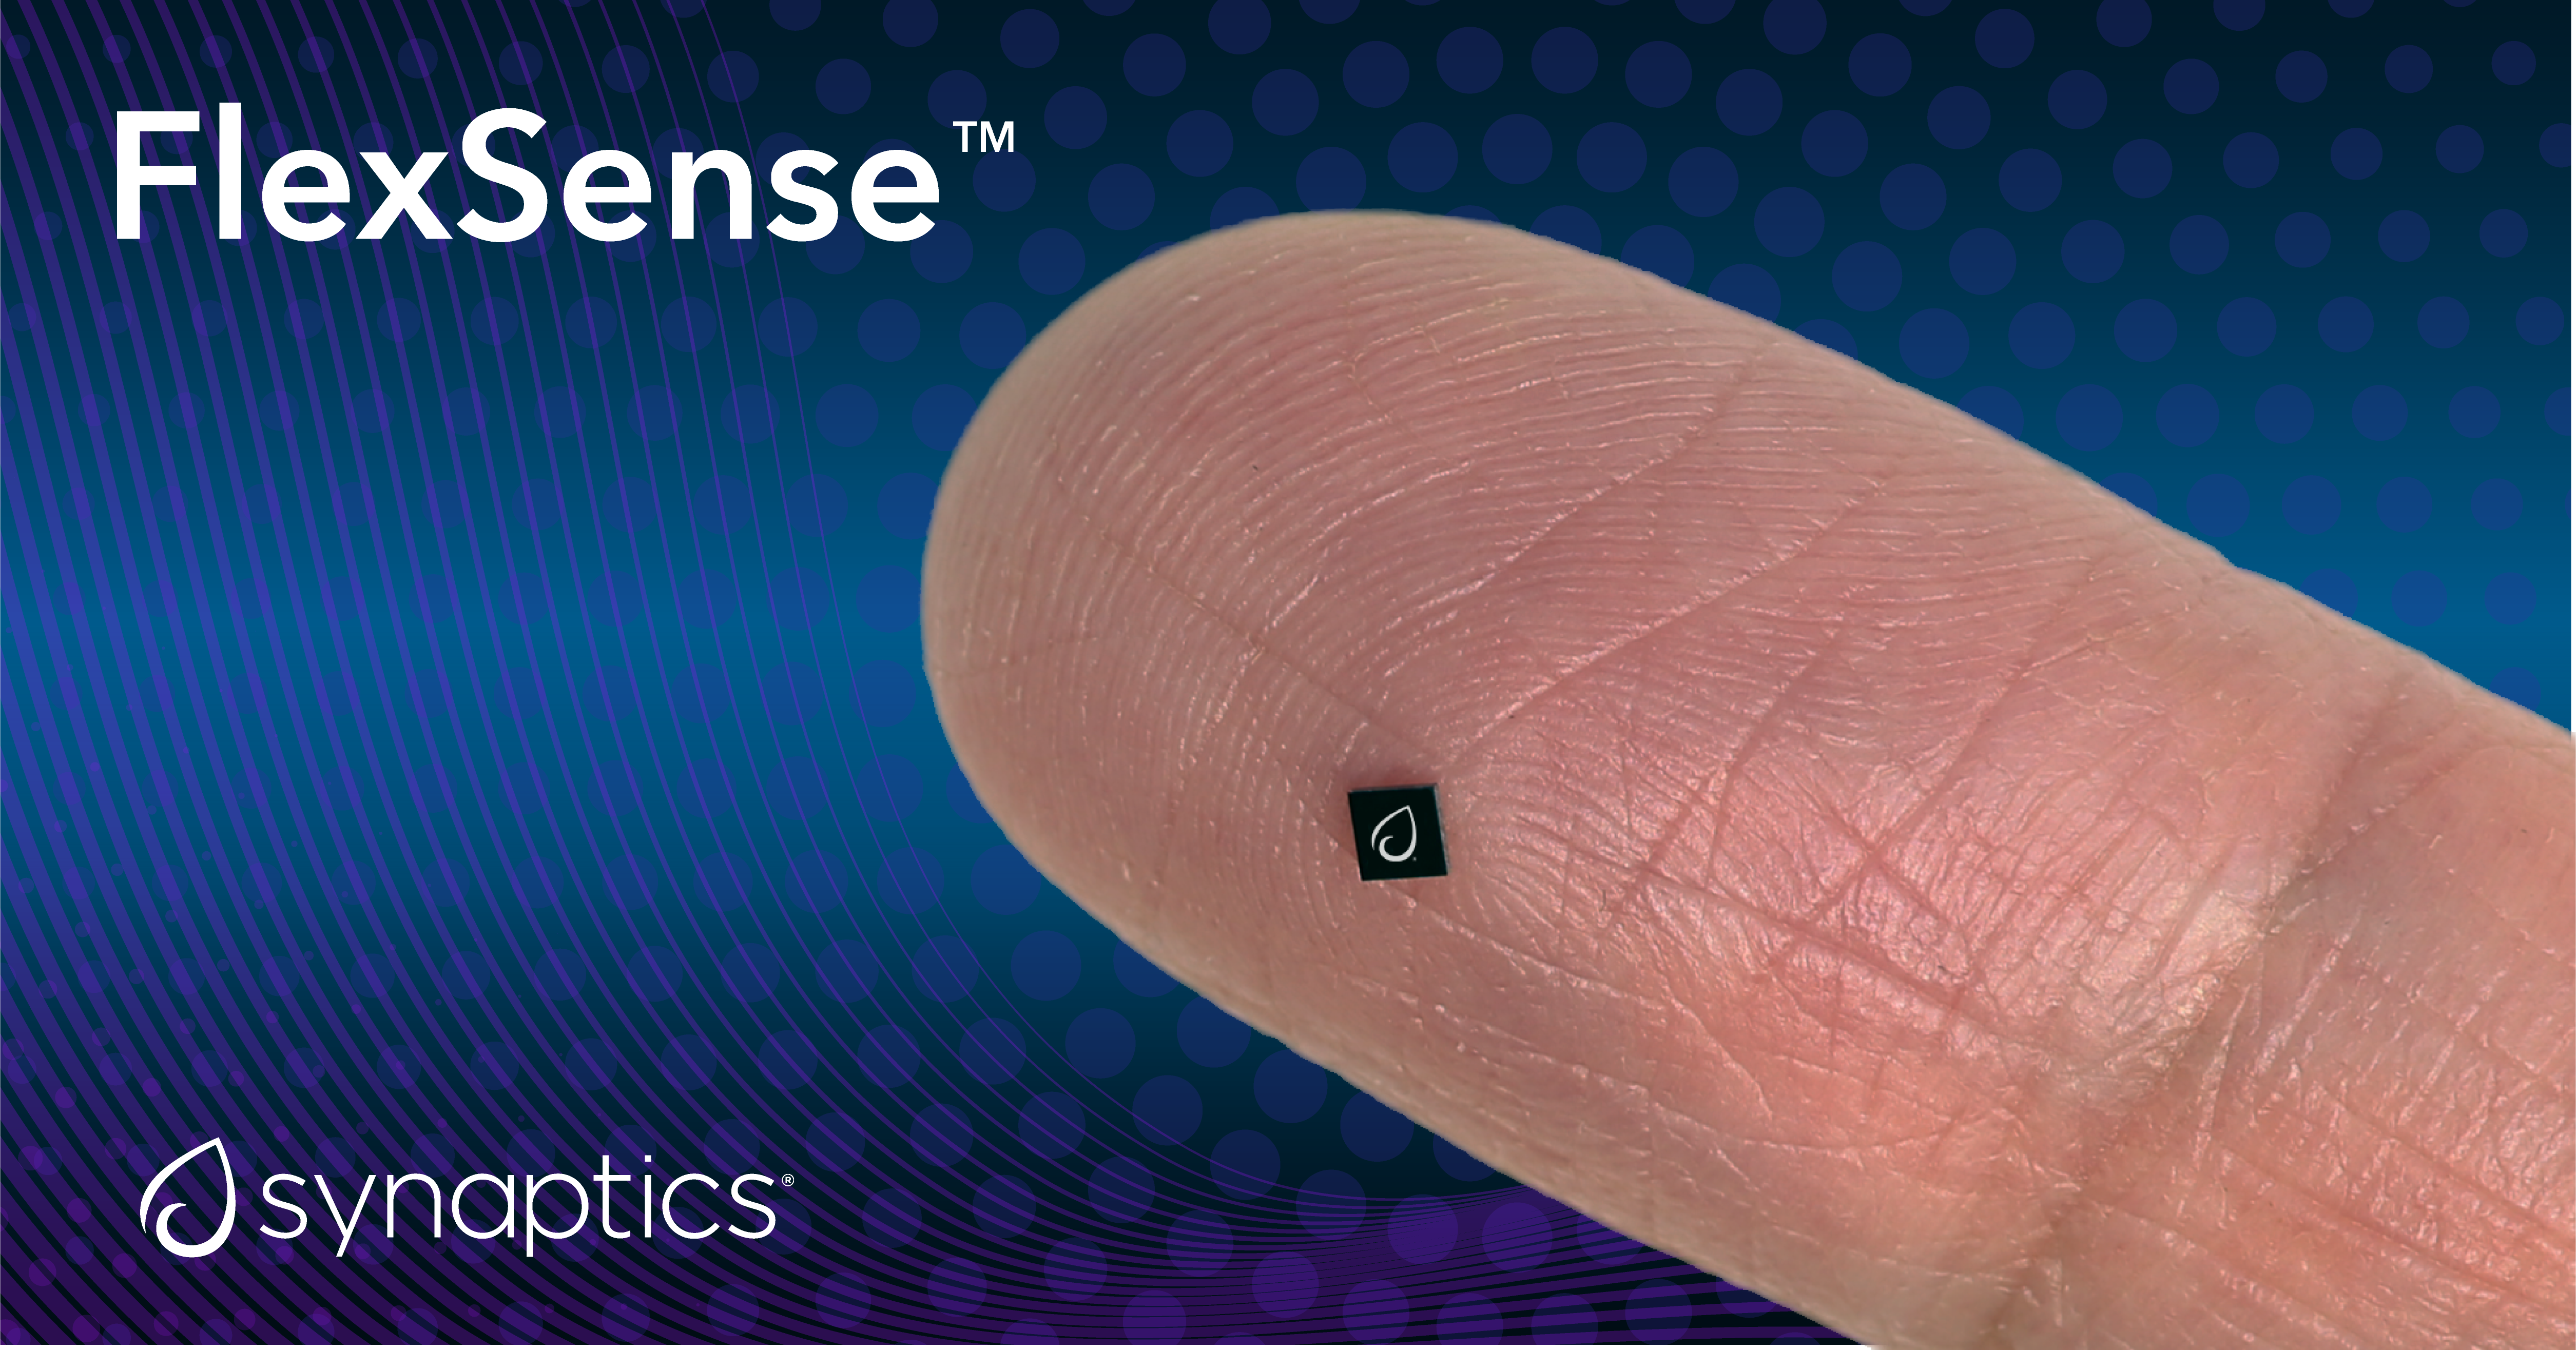 4-in-1 sensor fusion processor reduces power, size, and cost